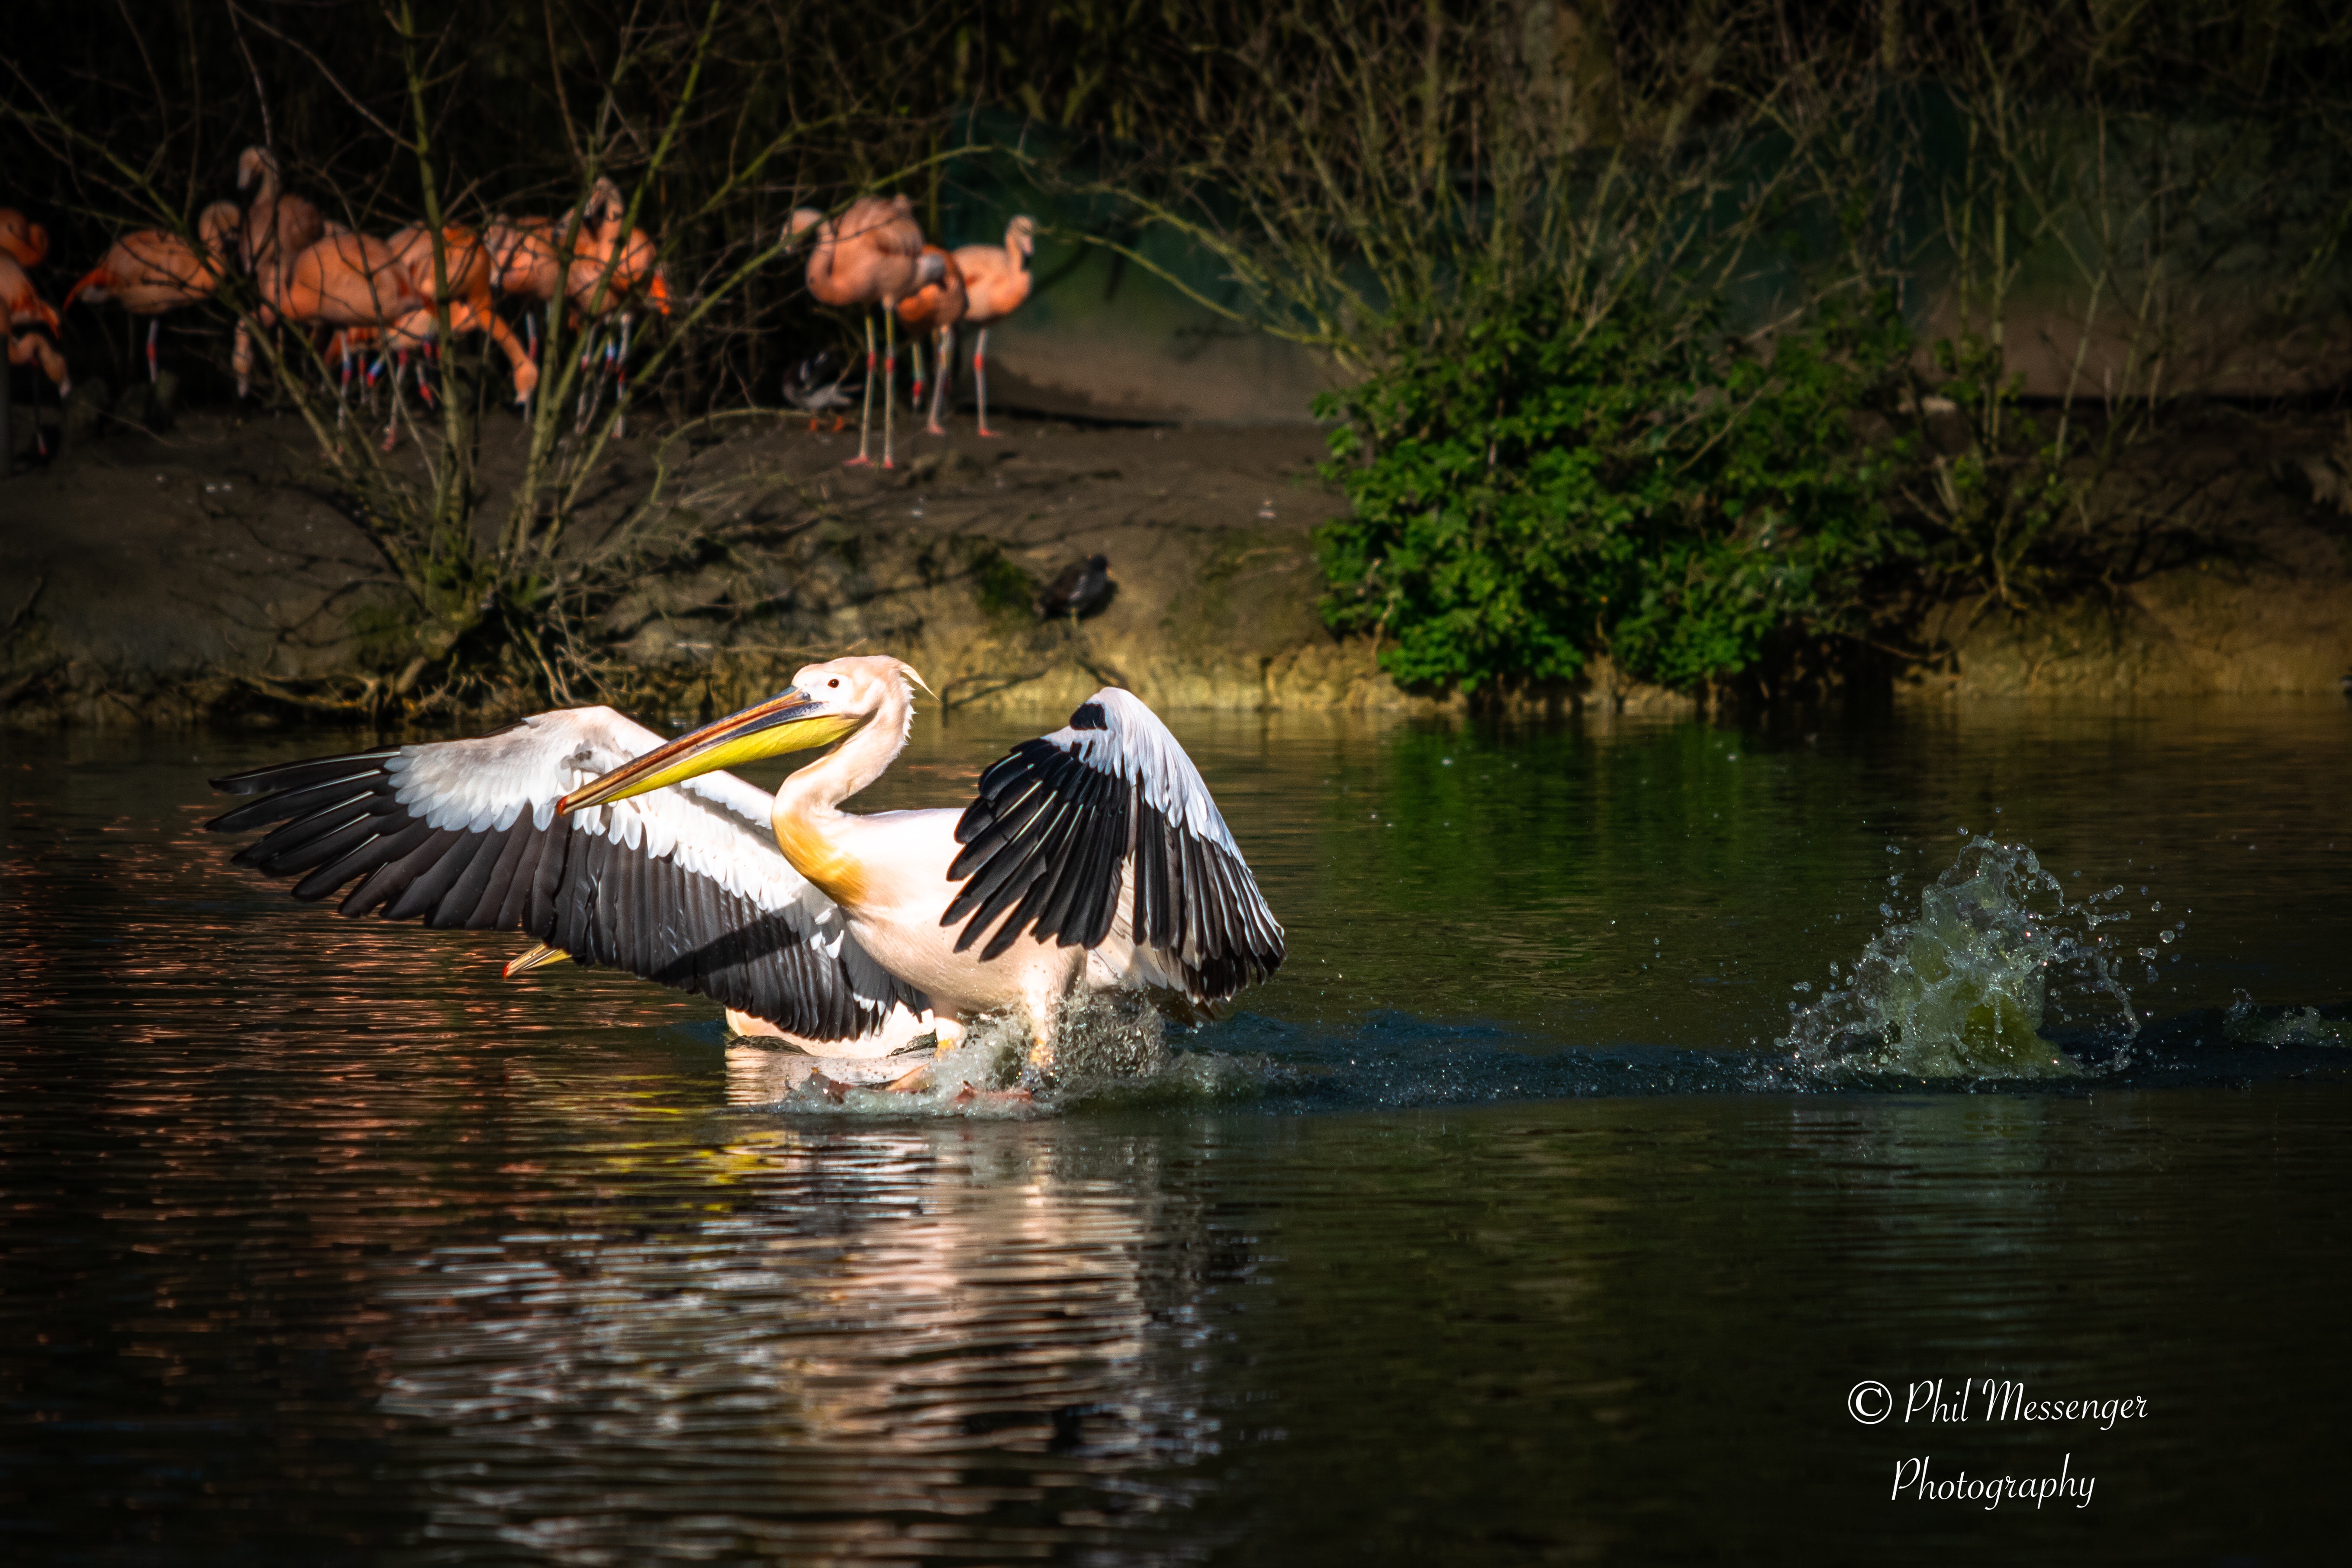 A pelican at Cotswold wildlife park, Burford, Oxfordshire.